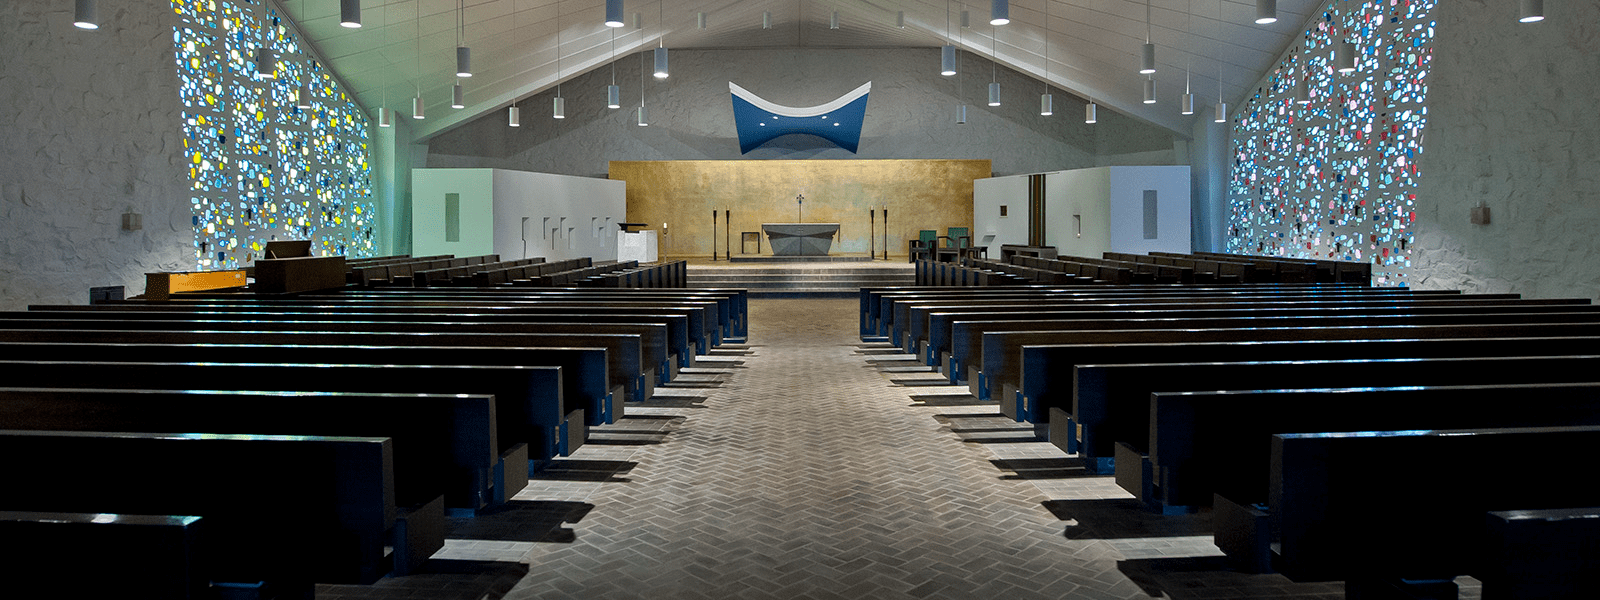 Inside Our Lady of Annunciation Chapel